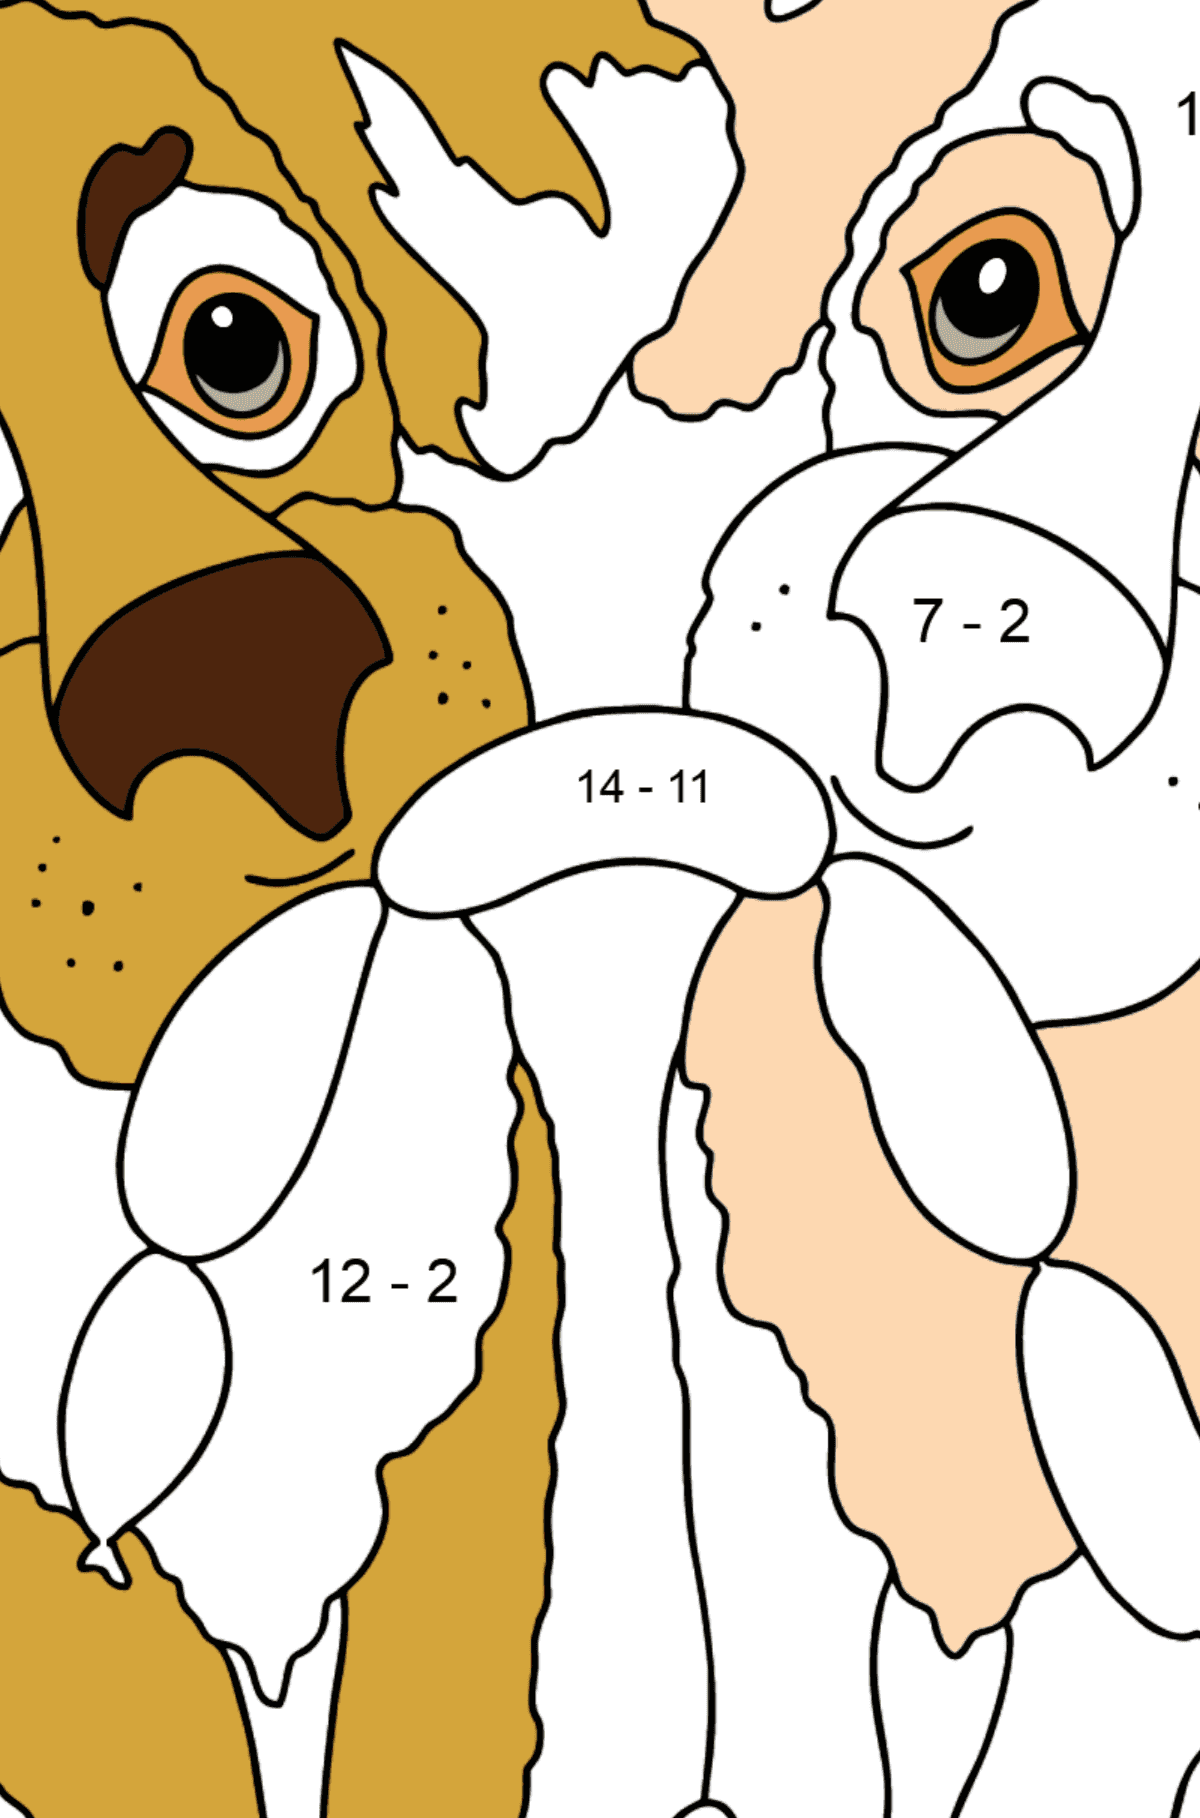 Coloring Page - Dogs Can't Share Sausages - Math Coloring - Subtraction for Kids